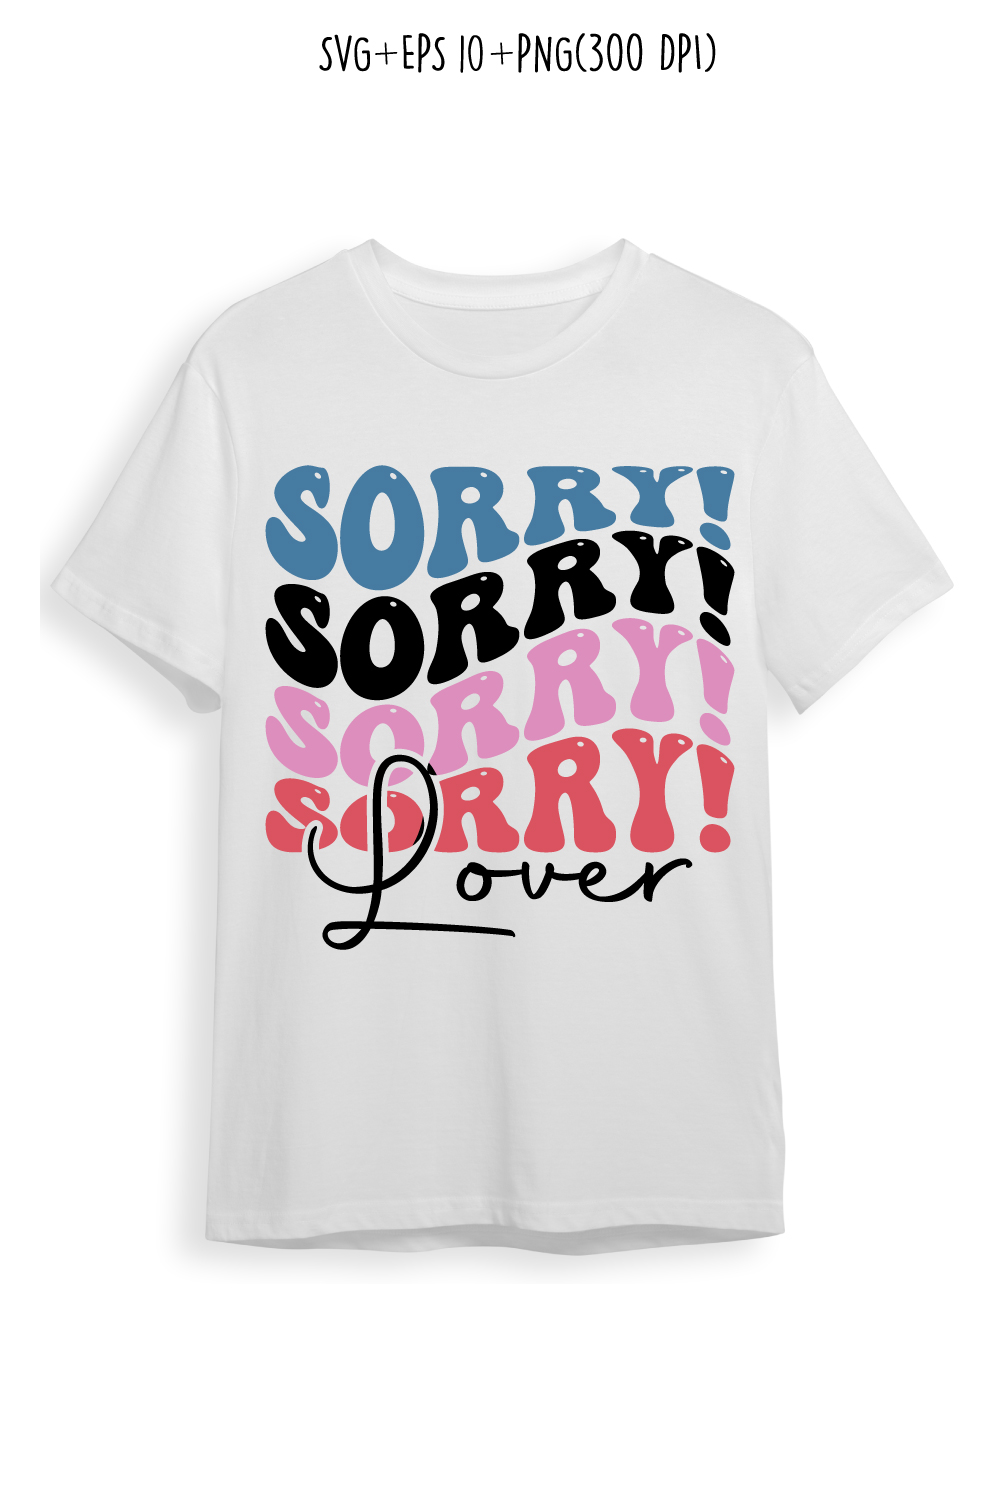 Sorry lover indoor game retro typography design for t-shirts, cards, frame artwork, phone cases, bags, mugs, stickers, tumblers, print, etc pinterest preview image.